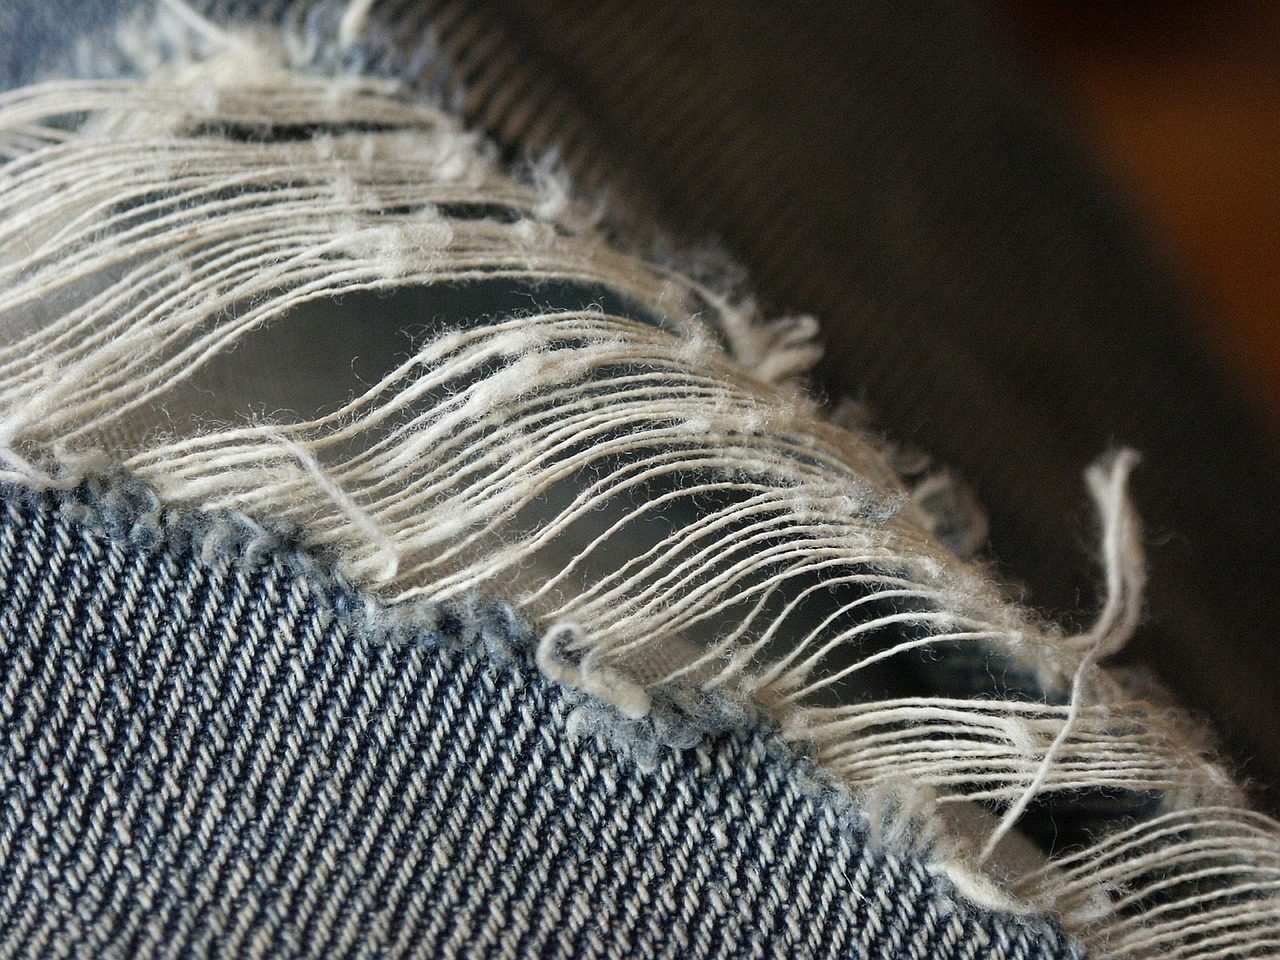 sewing jeans thread free photo